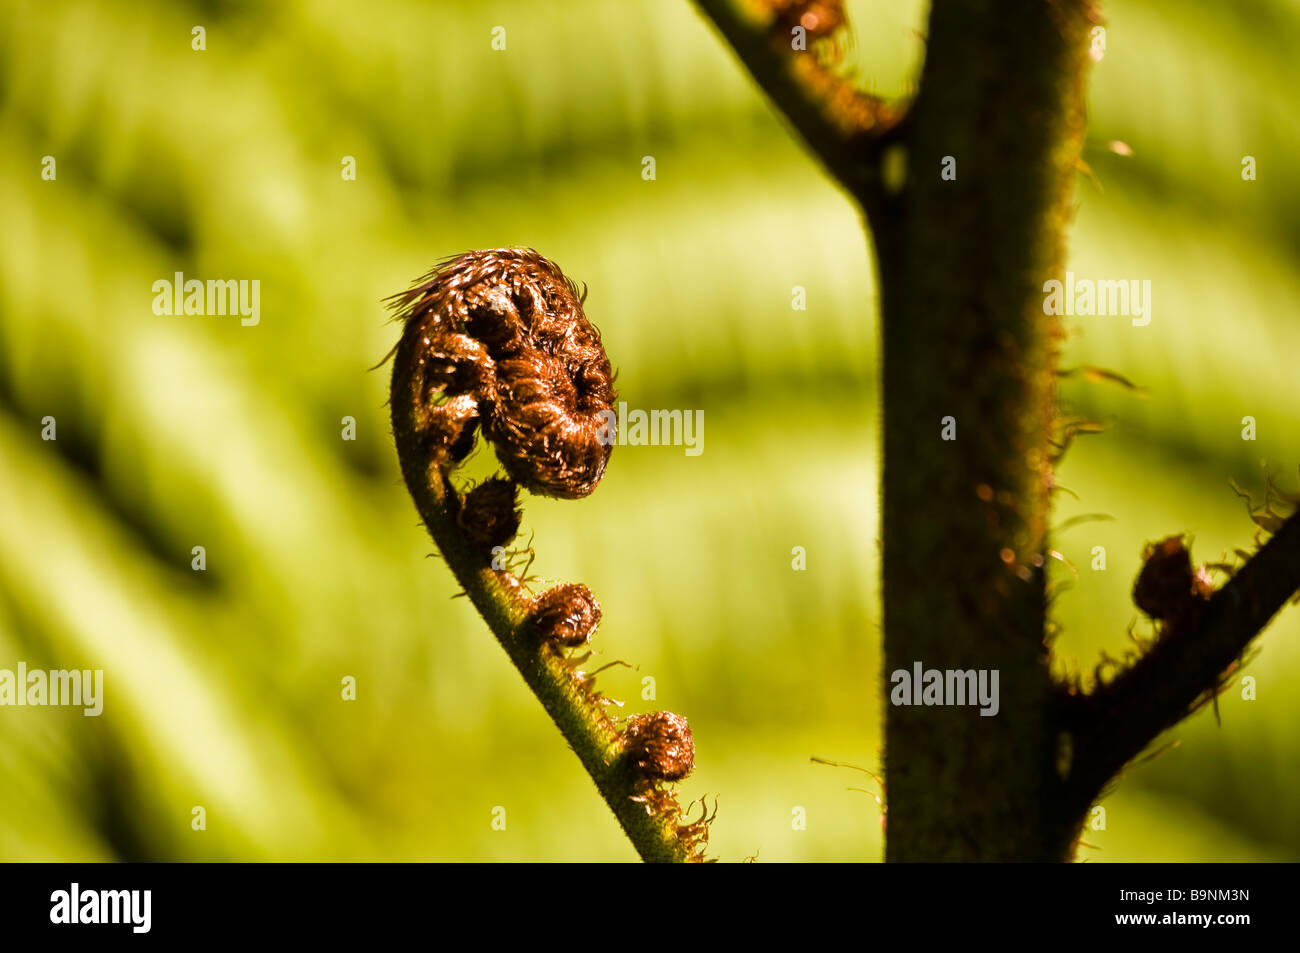 An unfurling fern frond called a koru in Maori symbolizing new life growth strength and peace in New Zealand  Stock Photo